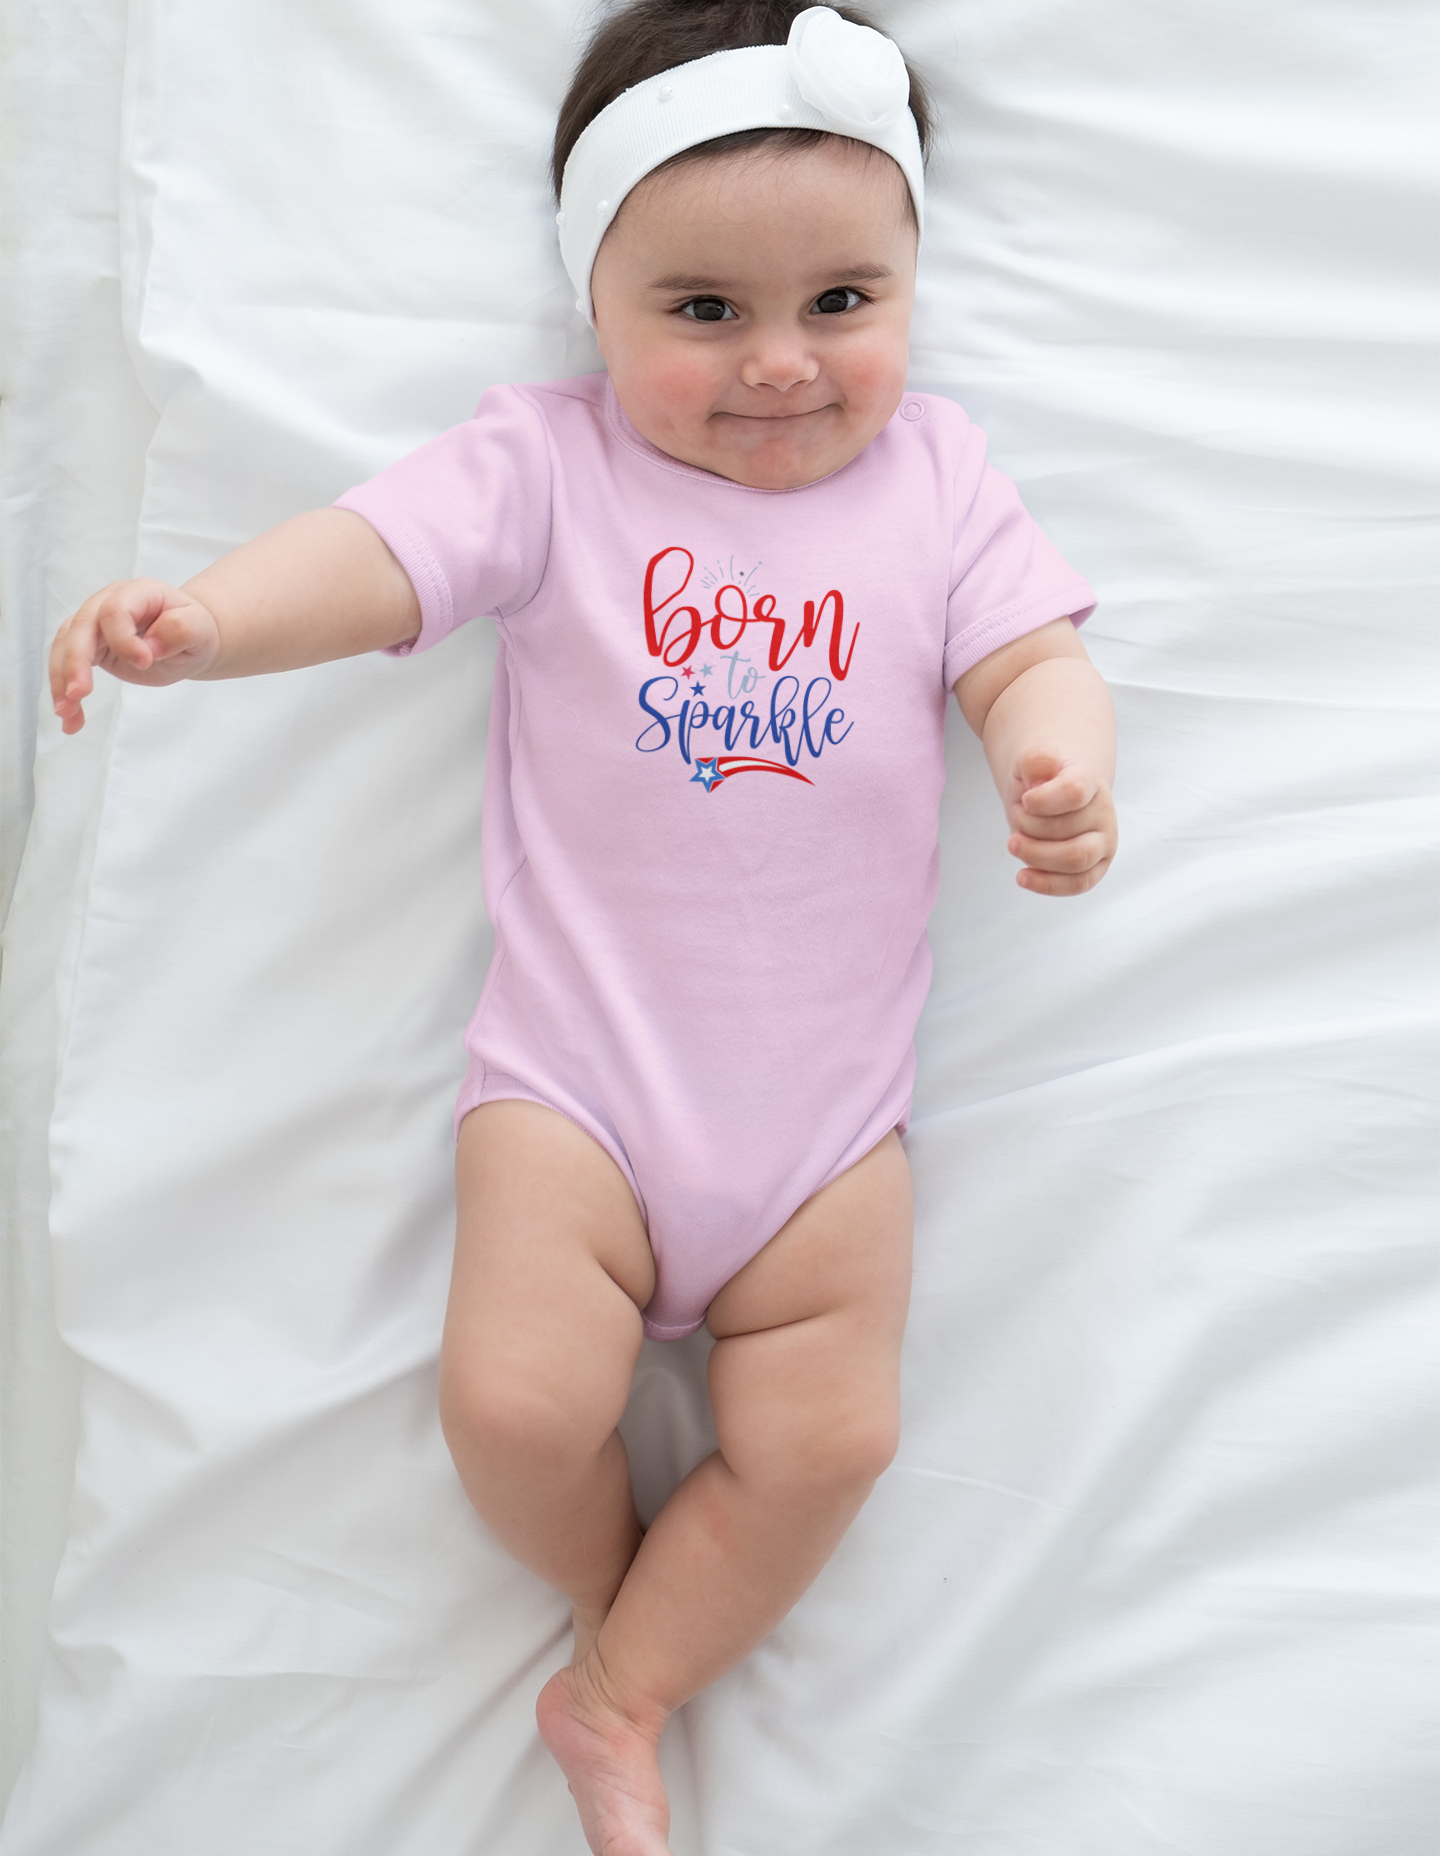 Get trendy with Born to sparkle Onsie - Kids clothes available at Good Gift Company. Grab yours for $13.50 today!